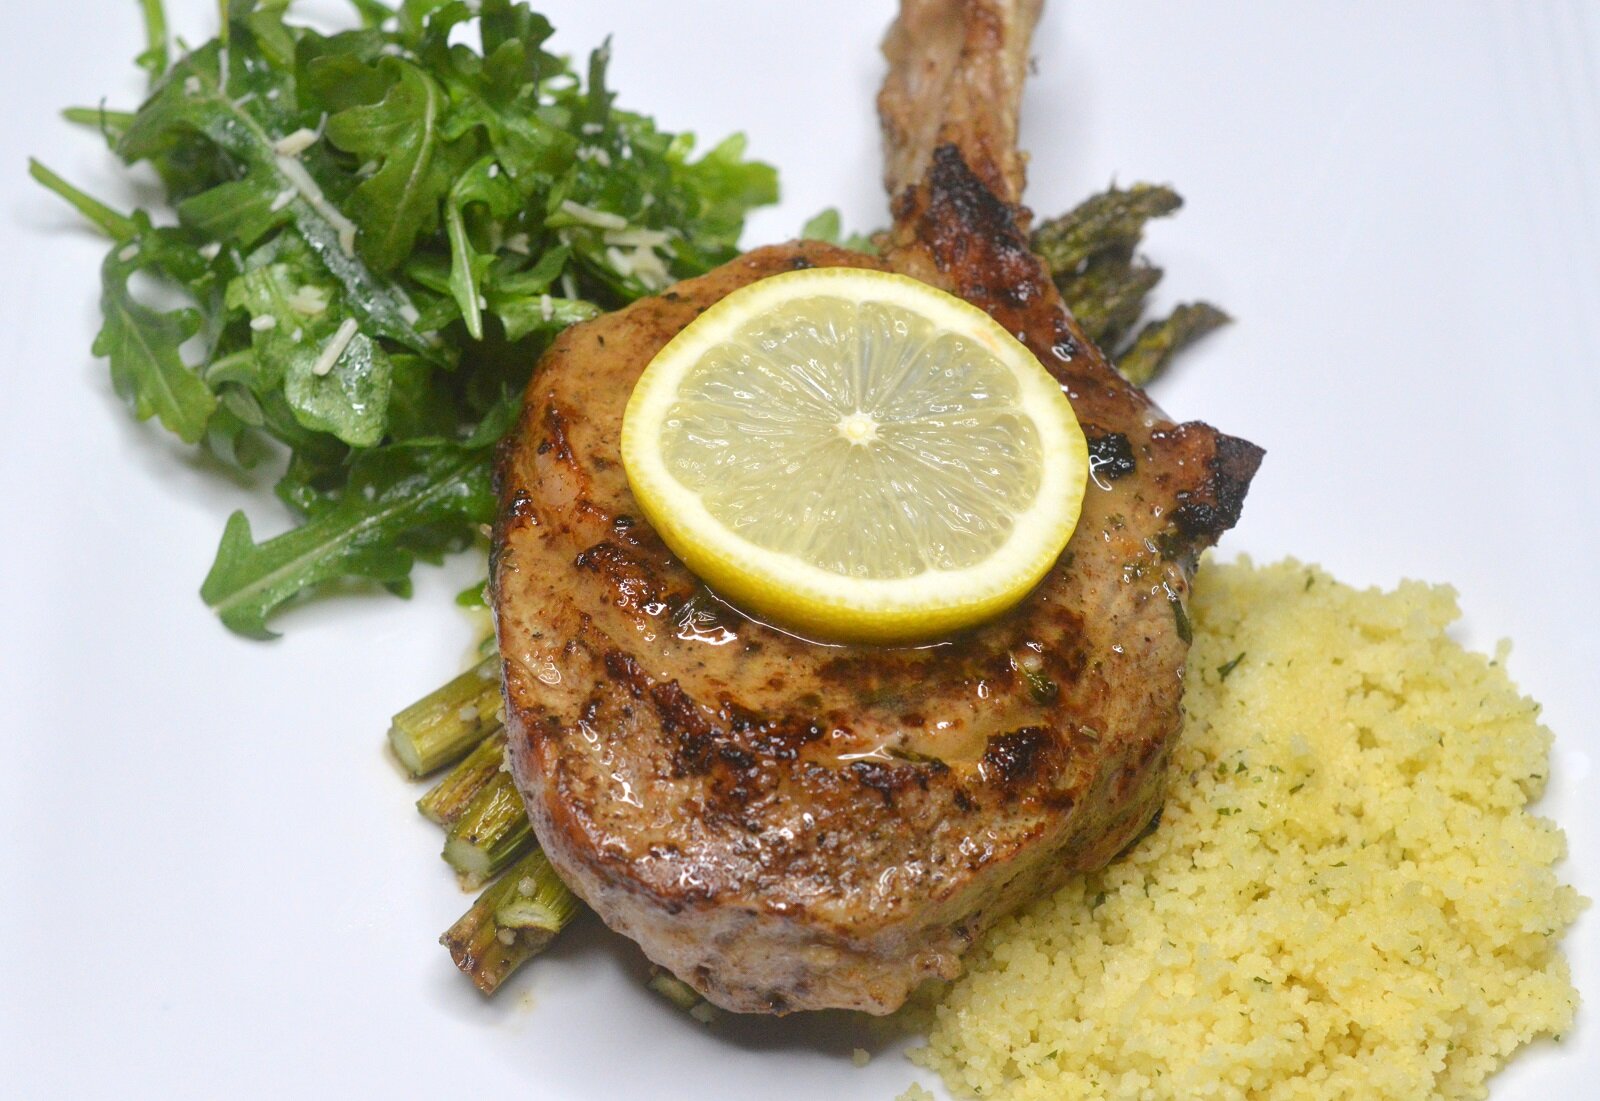 Pan-Fried Veal Chops with White Wine Sauce